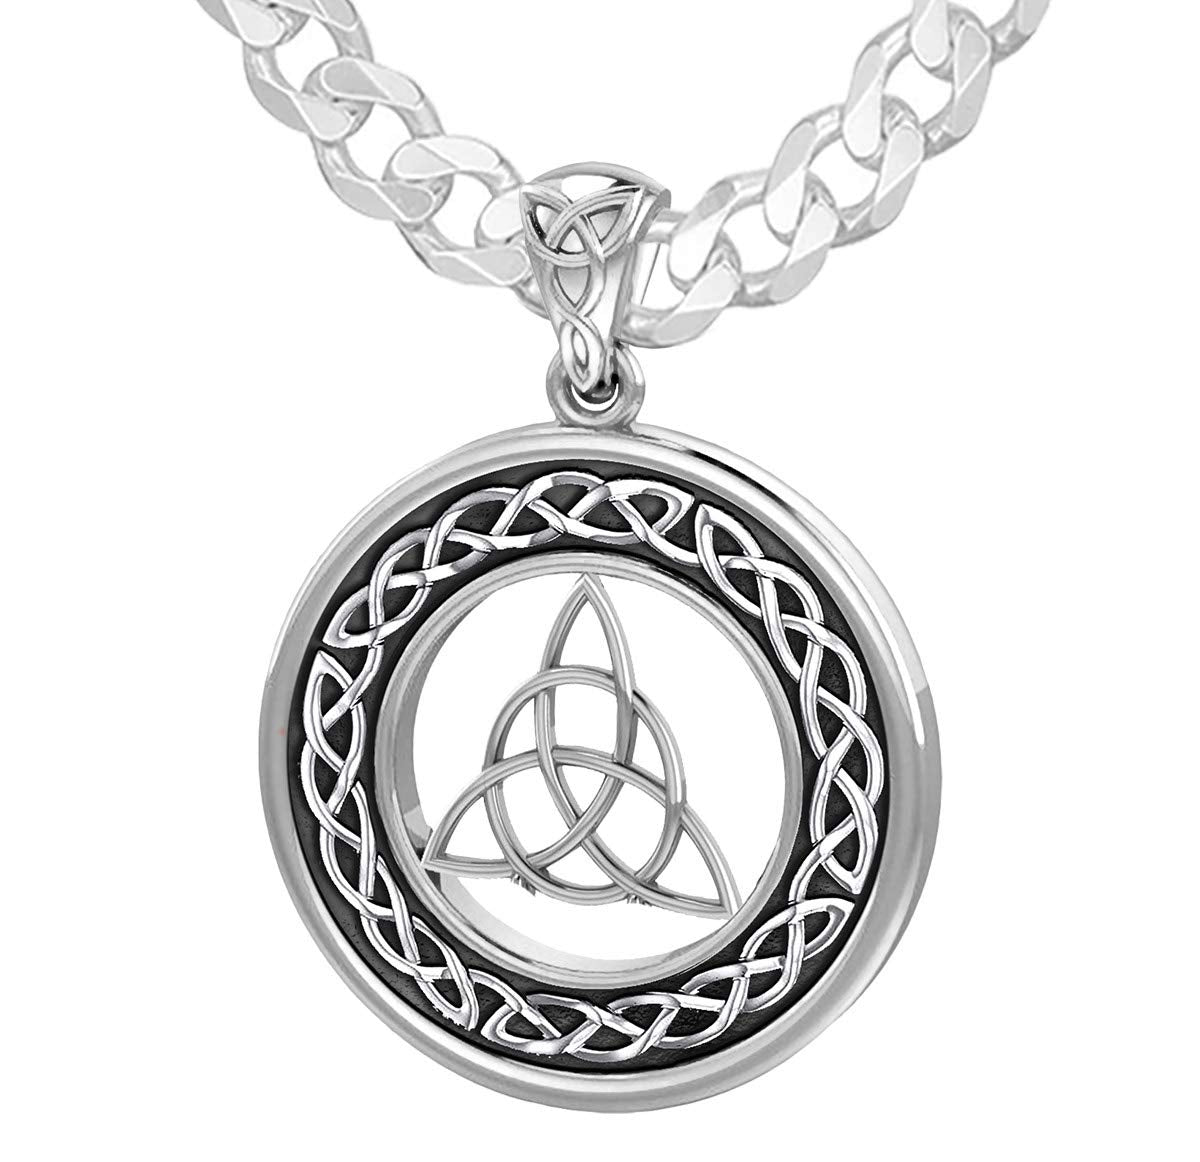 Men's 925 Sterling Silver Irish Celtic Trinity and Love Knot Pendant Necklace - US Jewels